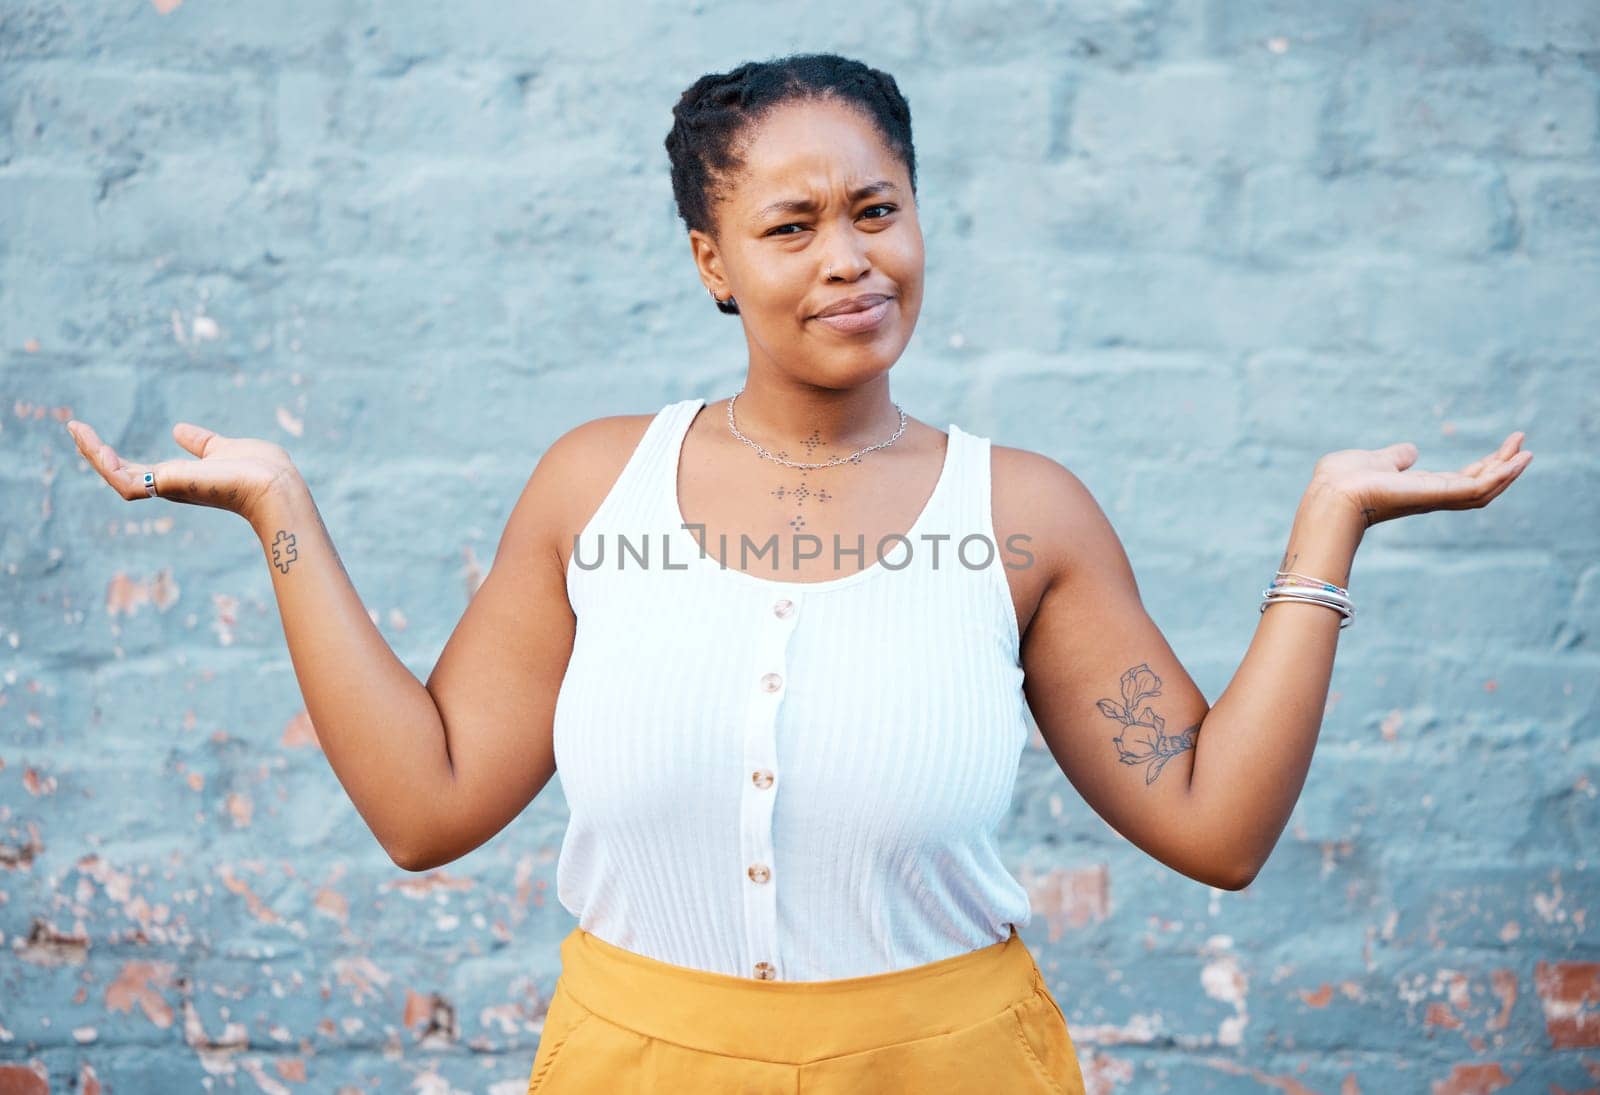 Portrait of confused black woman in doubt with a question and unsure gesture with arms up. Asking why, confusion and clueless girl with hands raised standing by a wall outside in urban town or city.